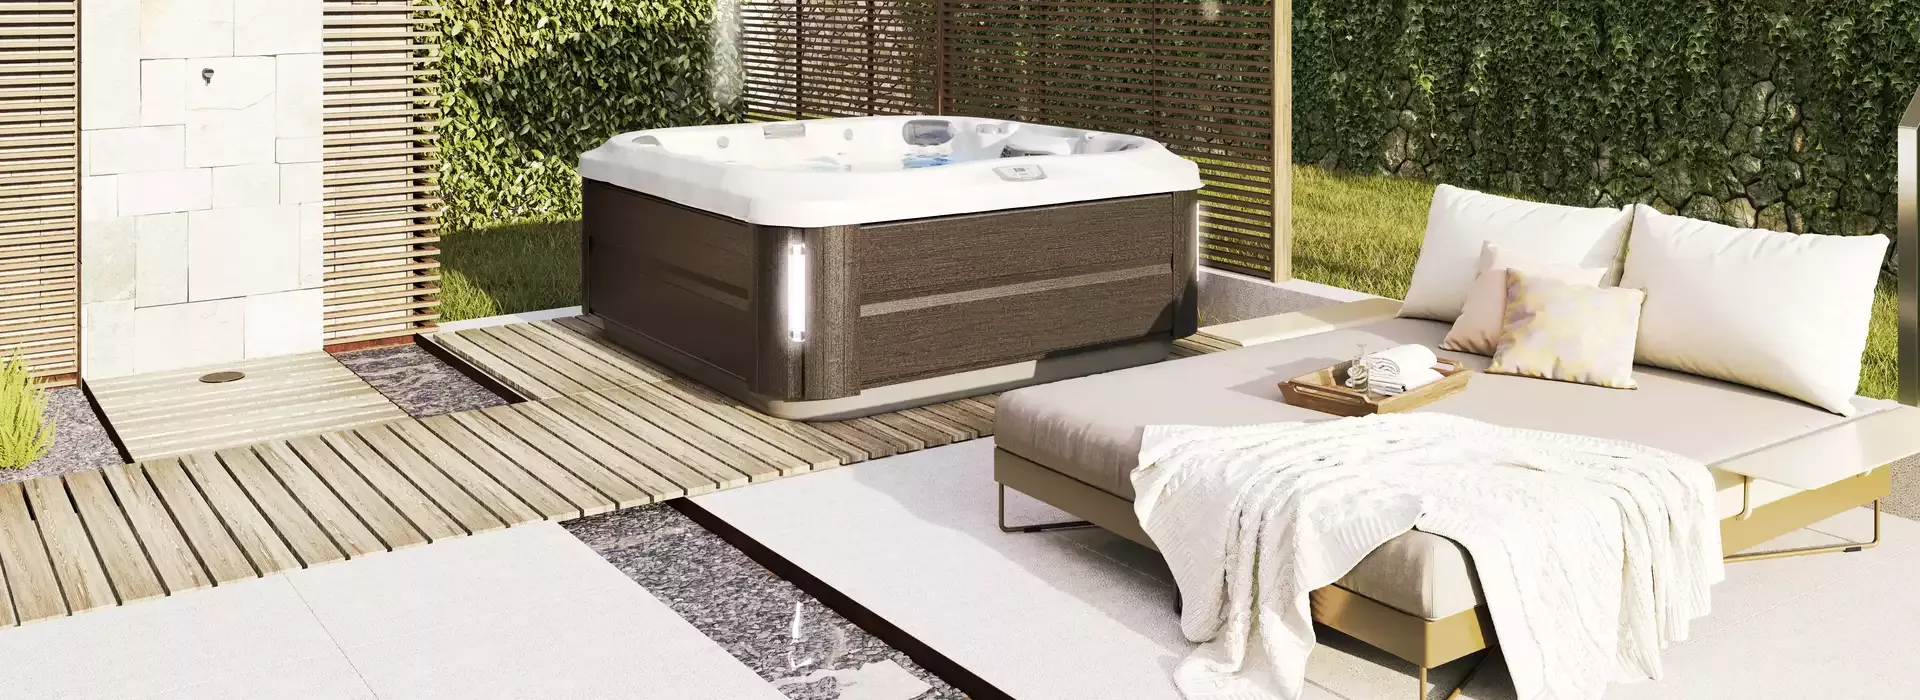 the j-300™ comfort hot tub collection